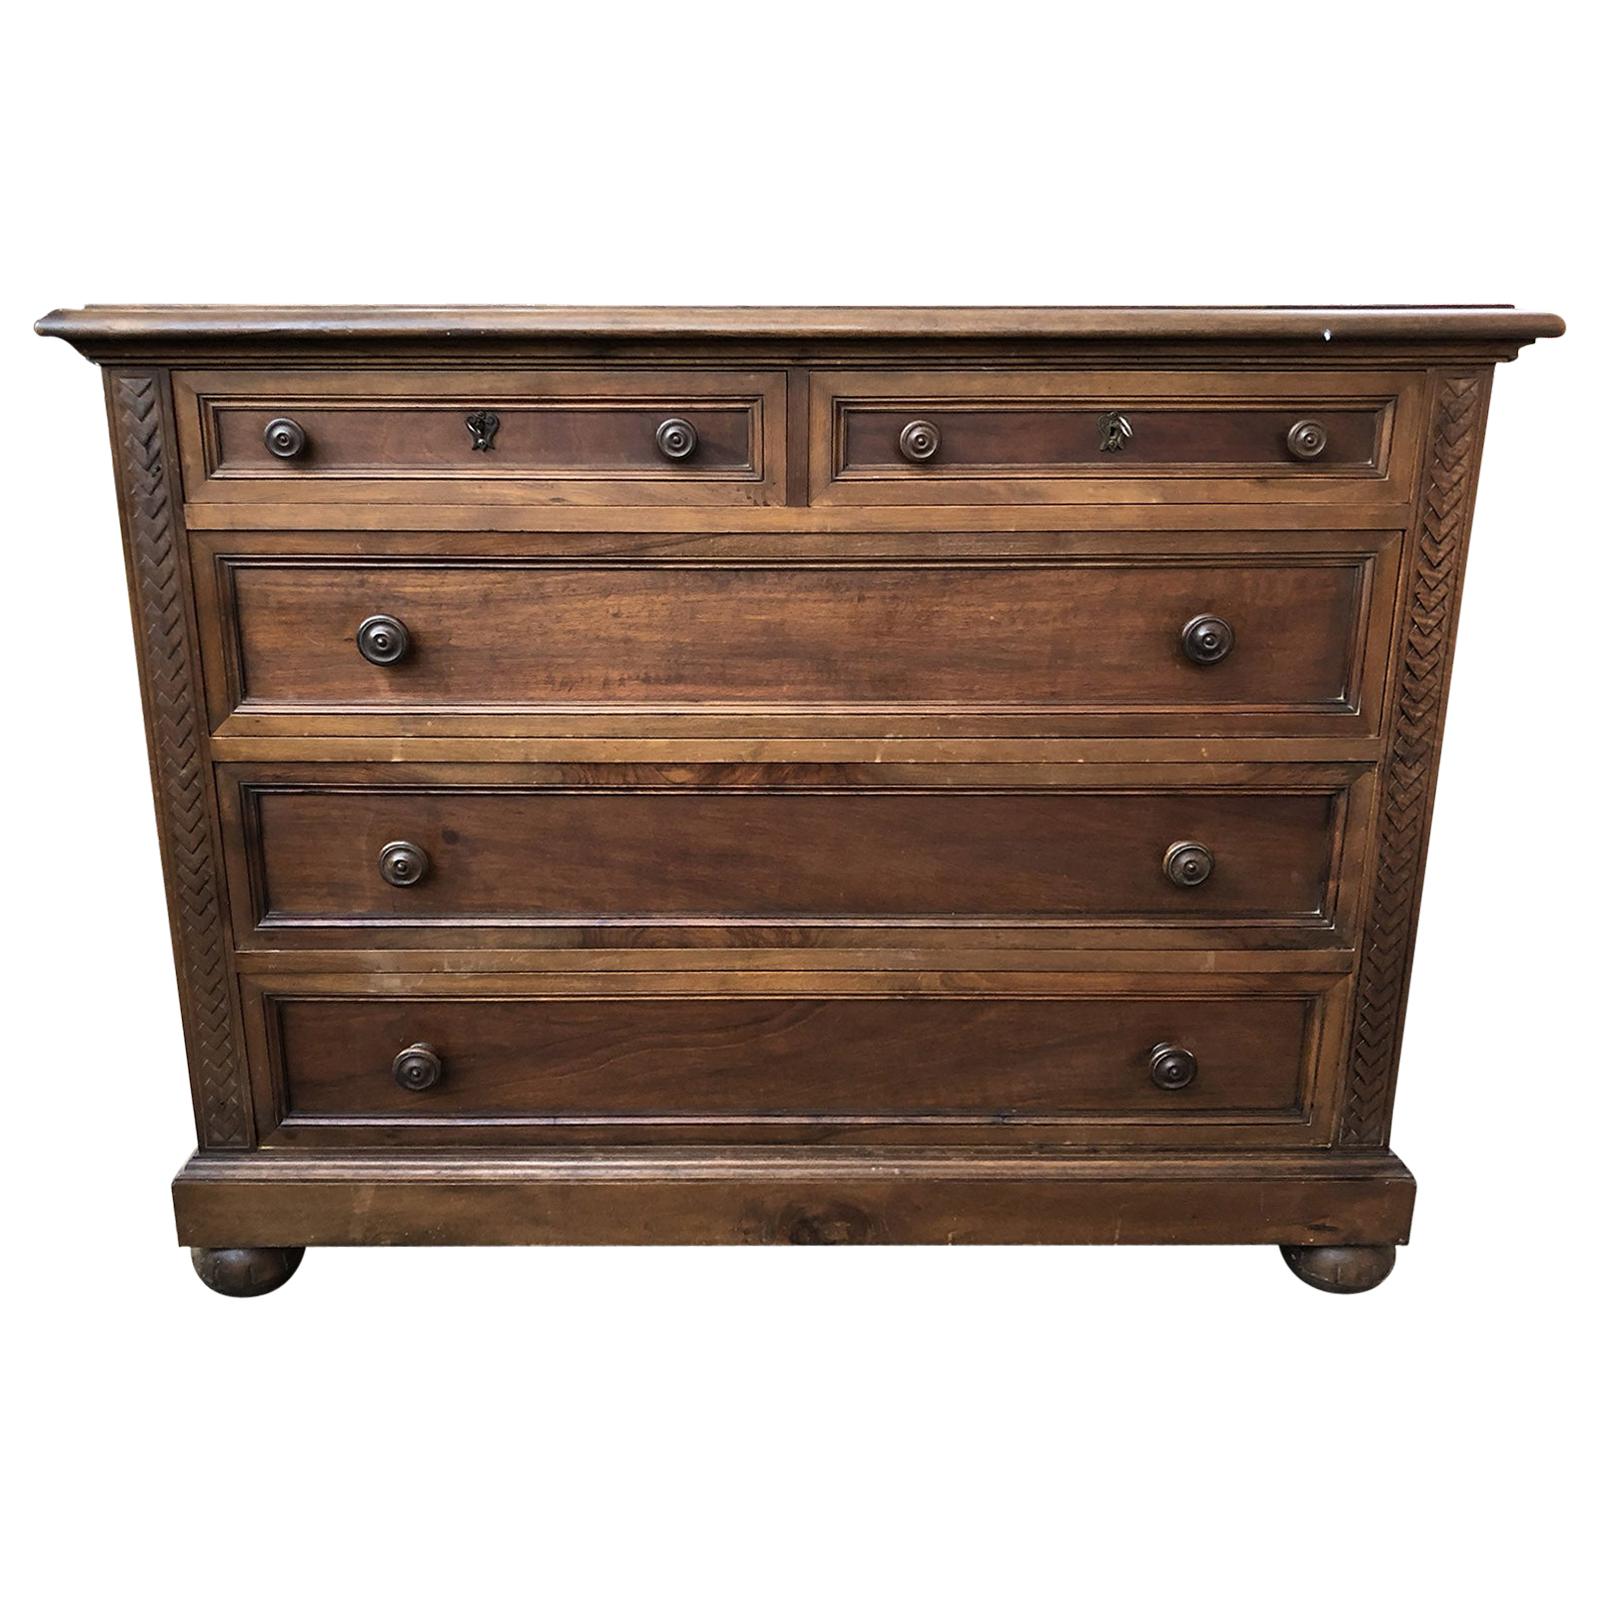 Early 20th Century Dresser Drawer in Walnut Restored Wax Polished from Tuscany